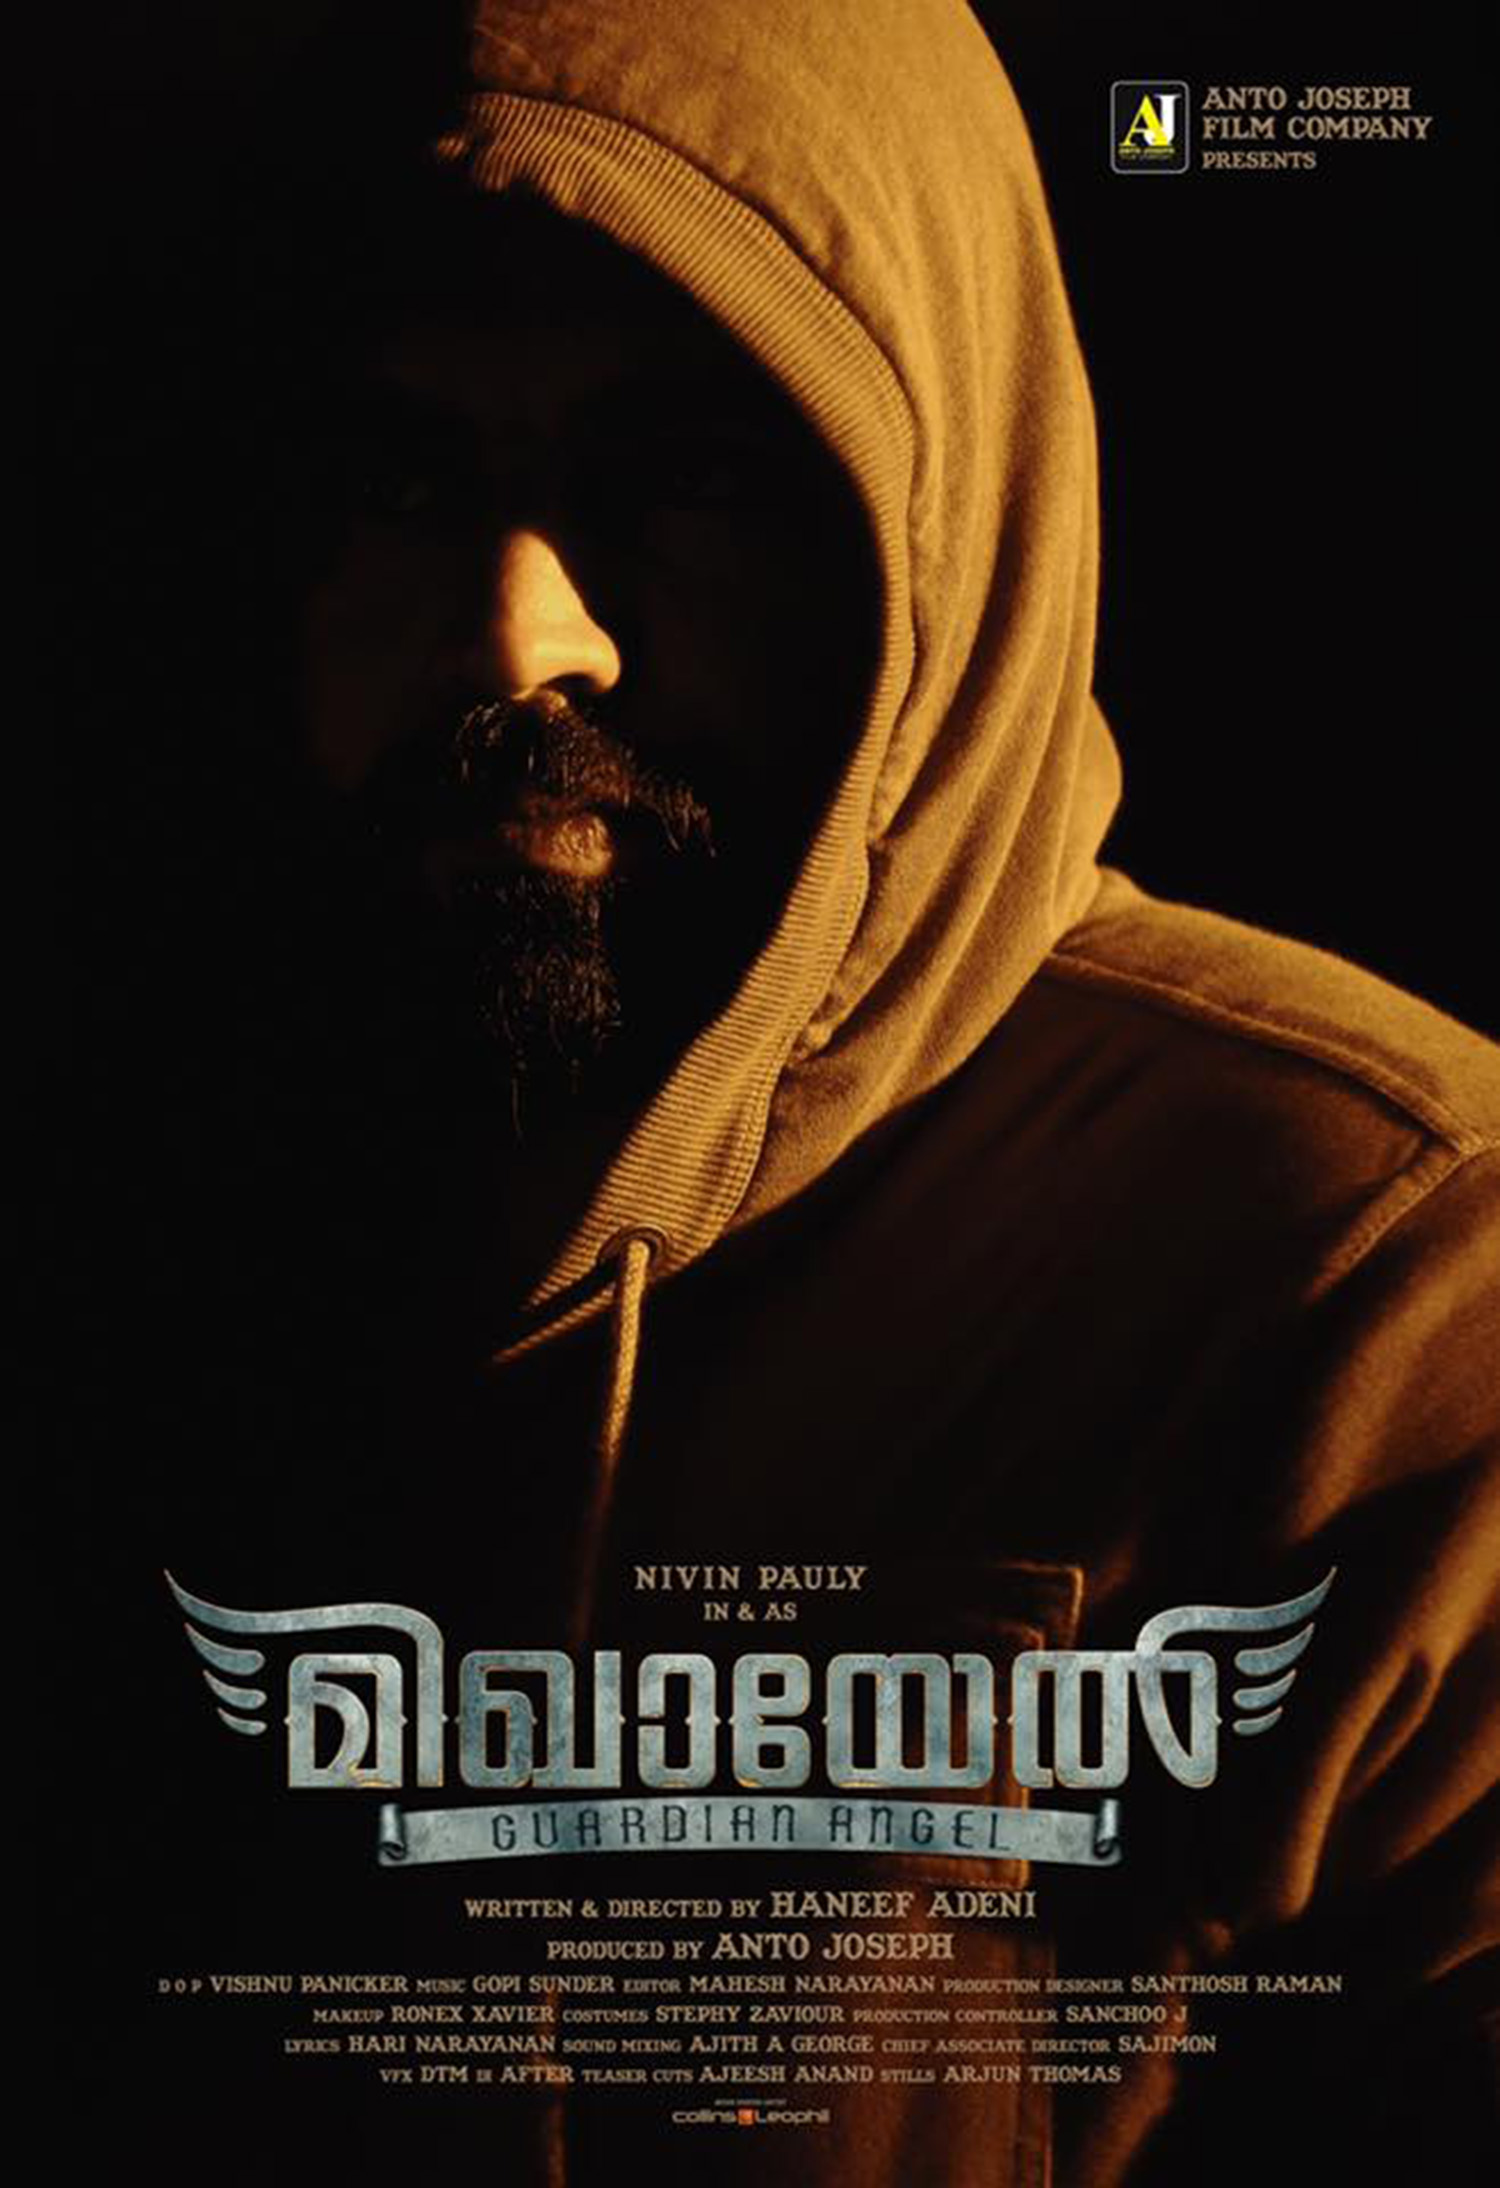 Mikhael,Mikhael first look poster,first look poster of nivin pauly's Mikhael,Mikhael movie poster,Mikhael movie first look poster,Mikhael malayalam movie first look poster,nivin pauly in Mikhael,haneef adeni,haneef adeni's Mikhael first look poster